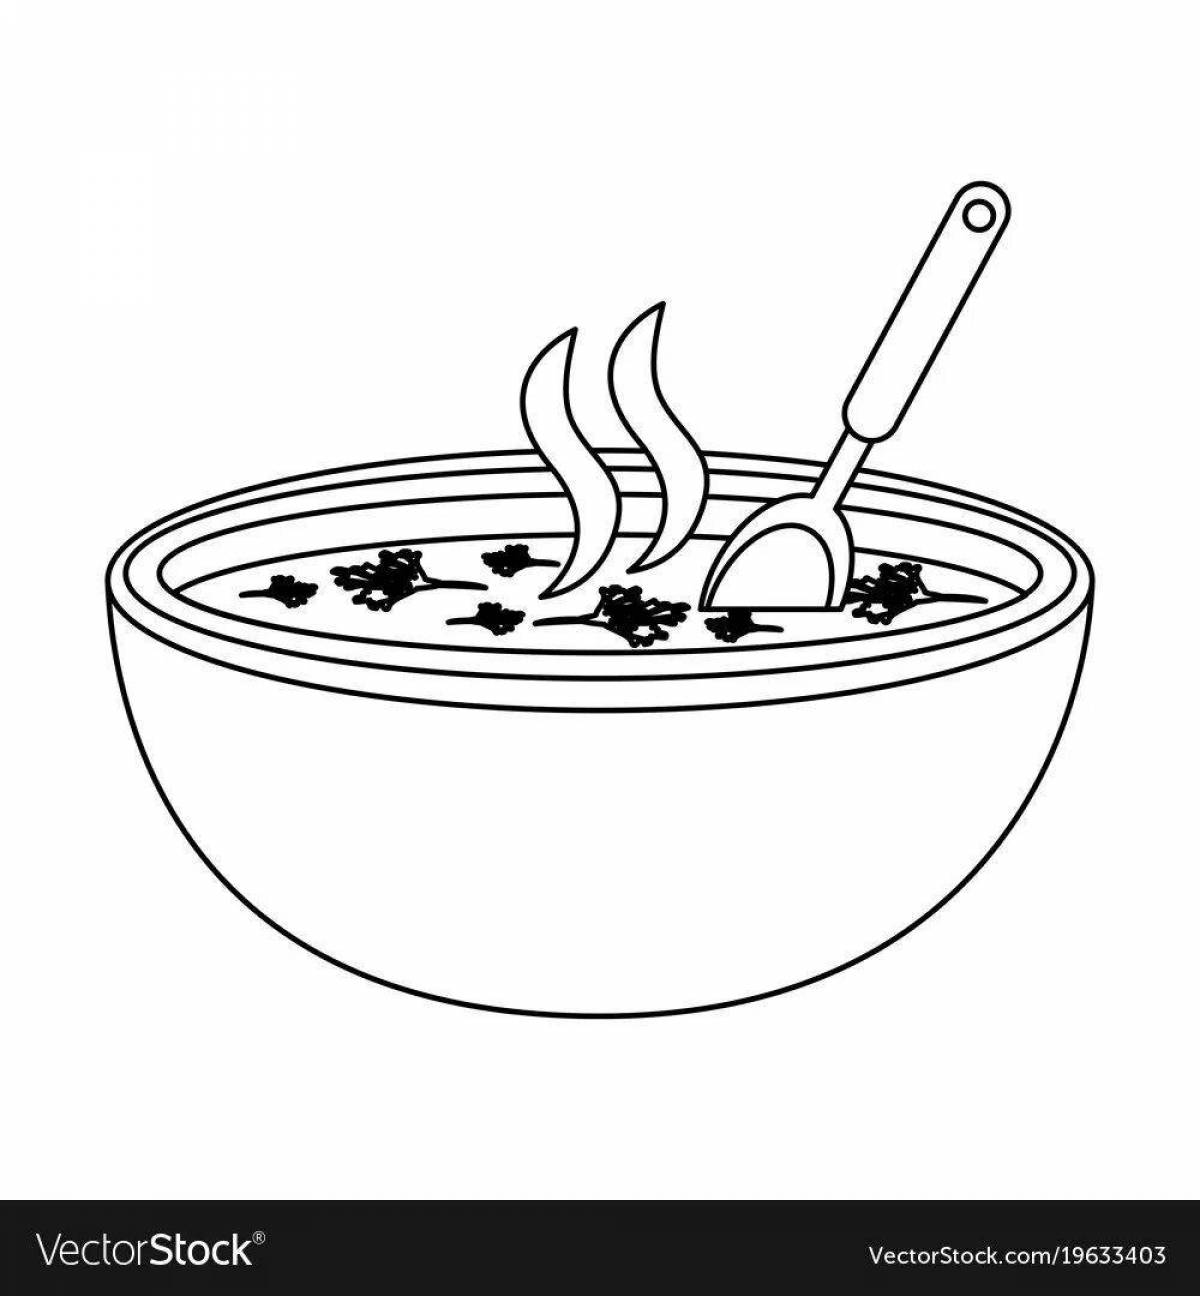 Detailed food plate coloring page